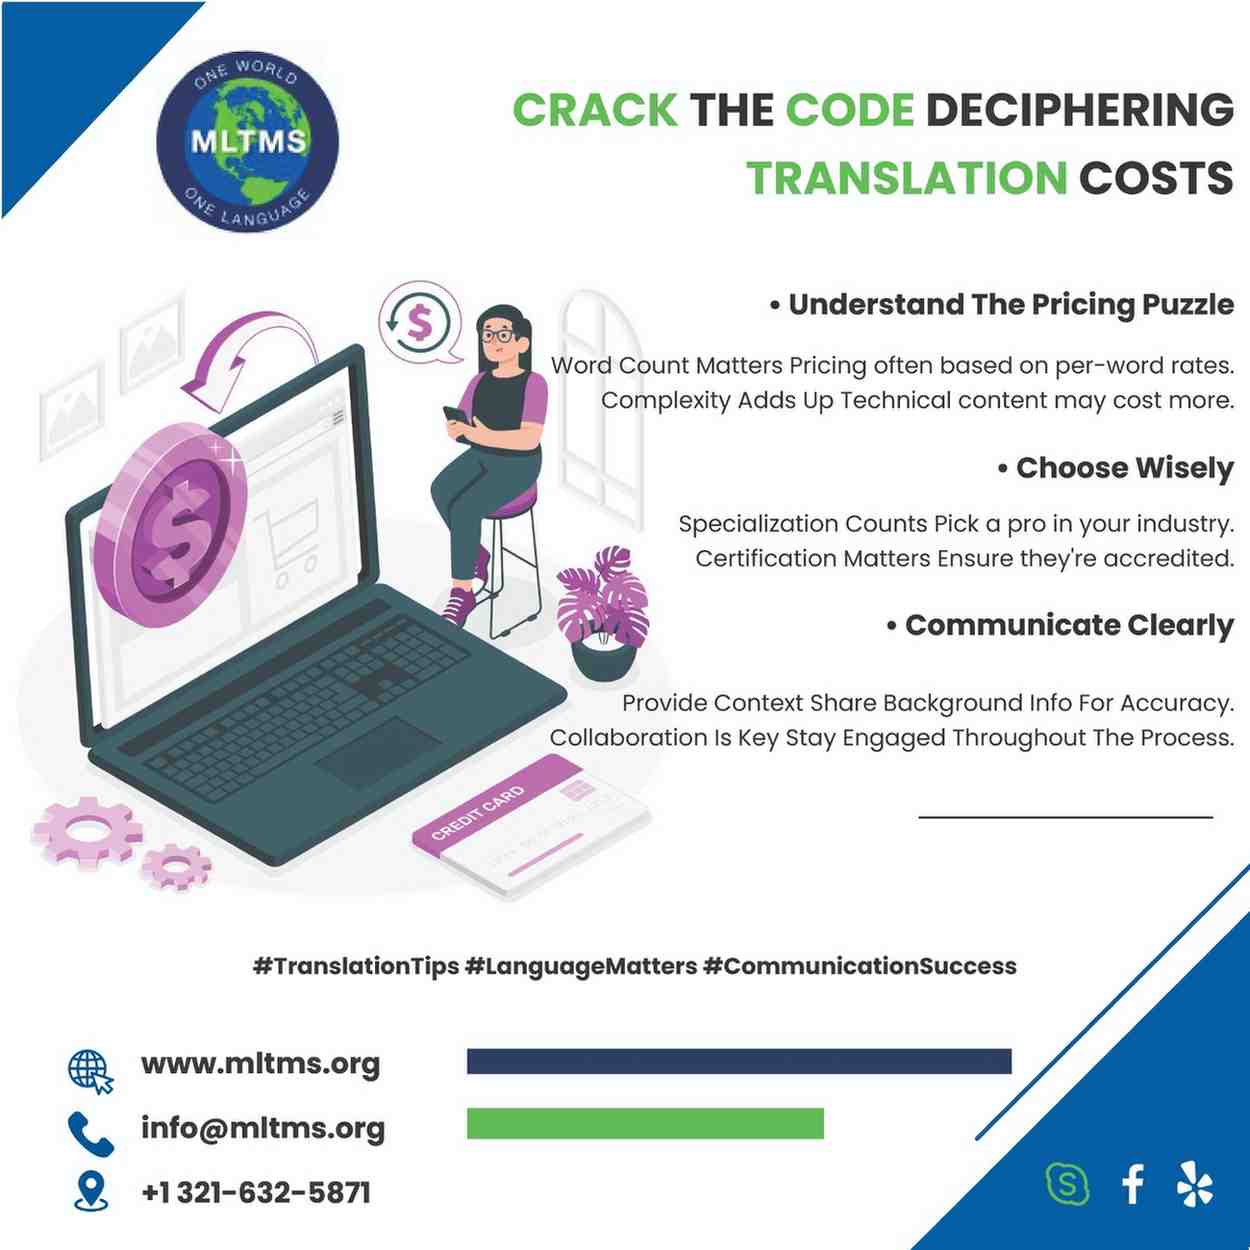 Deciphering Translation Costs - Finding The Right Translator Or Interpreter For Your Needs